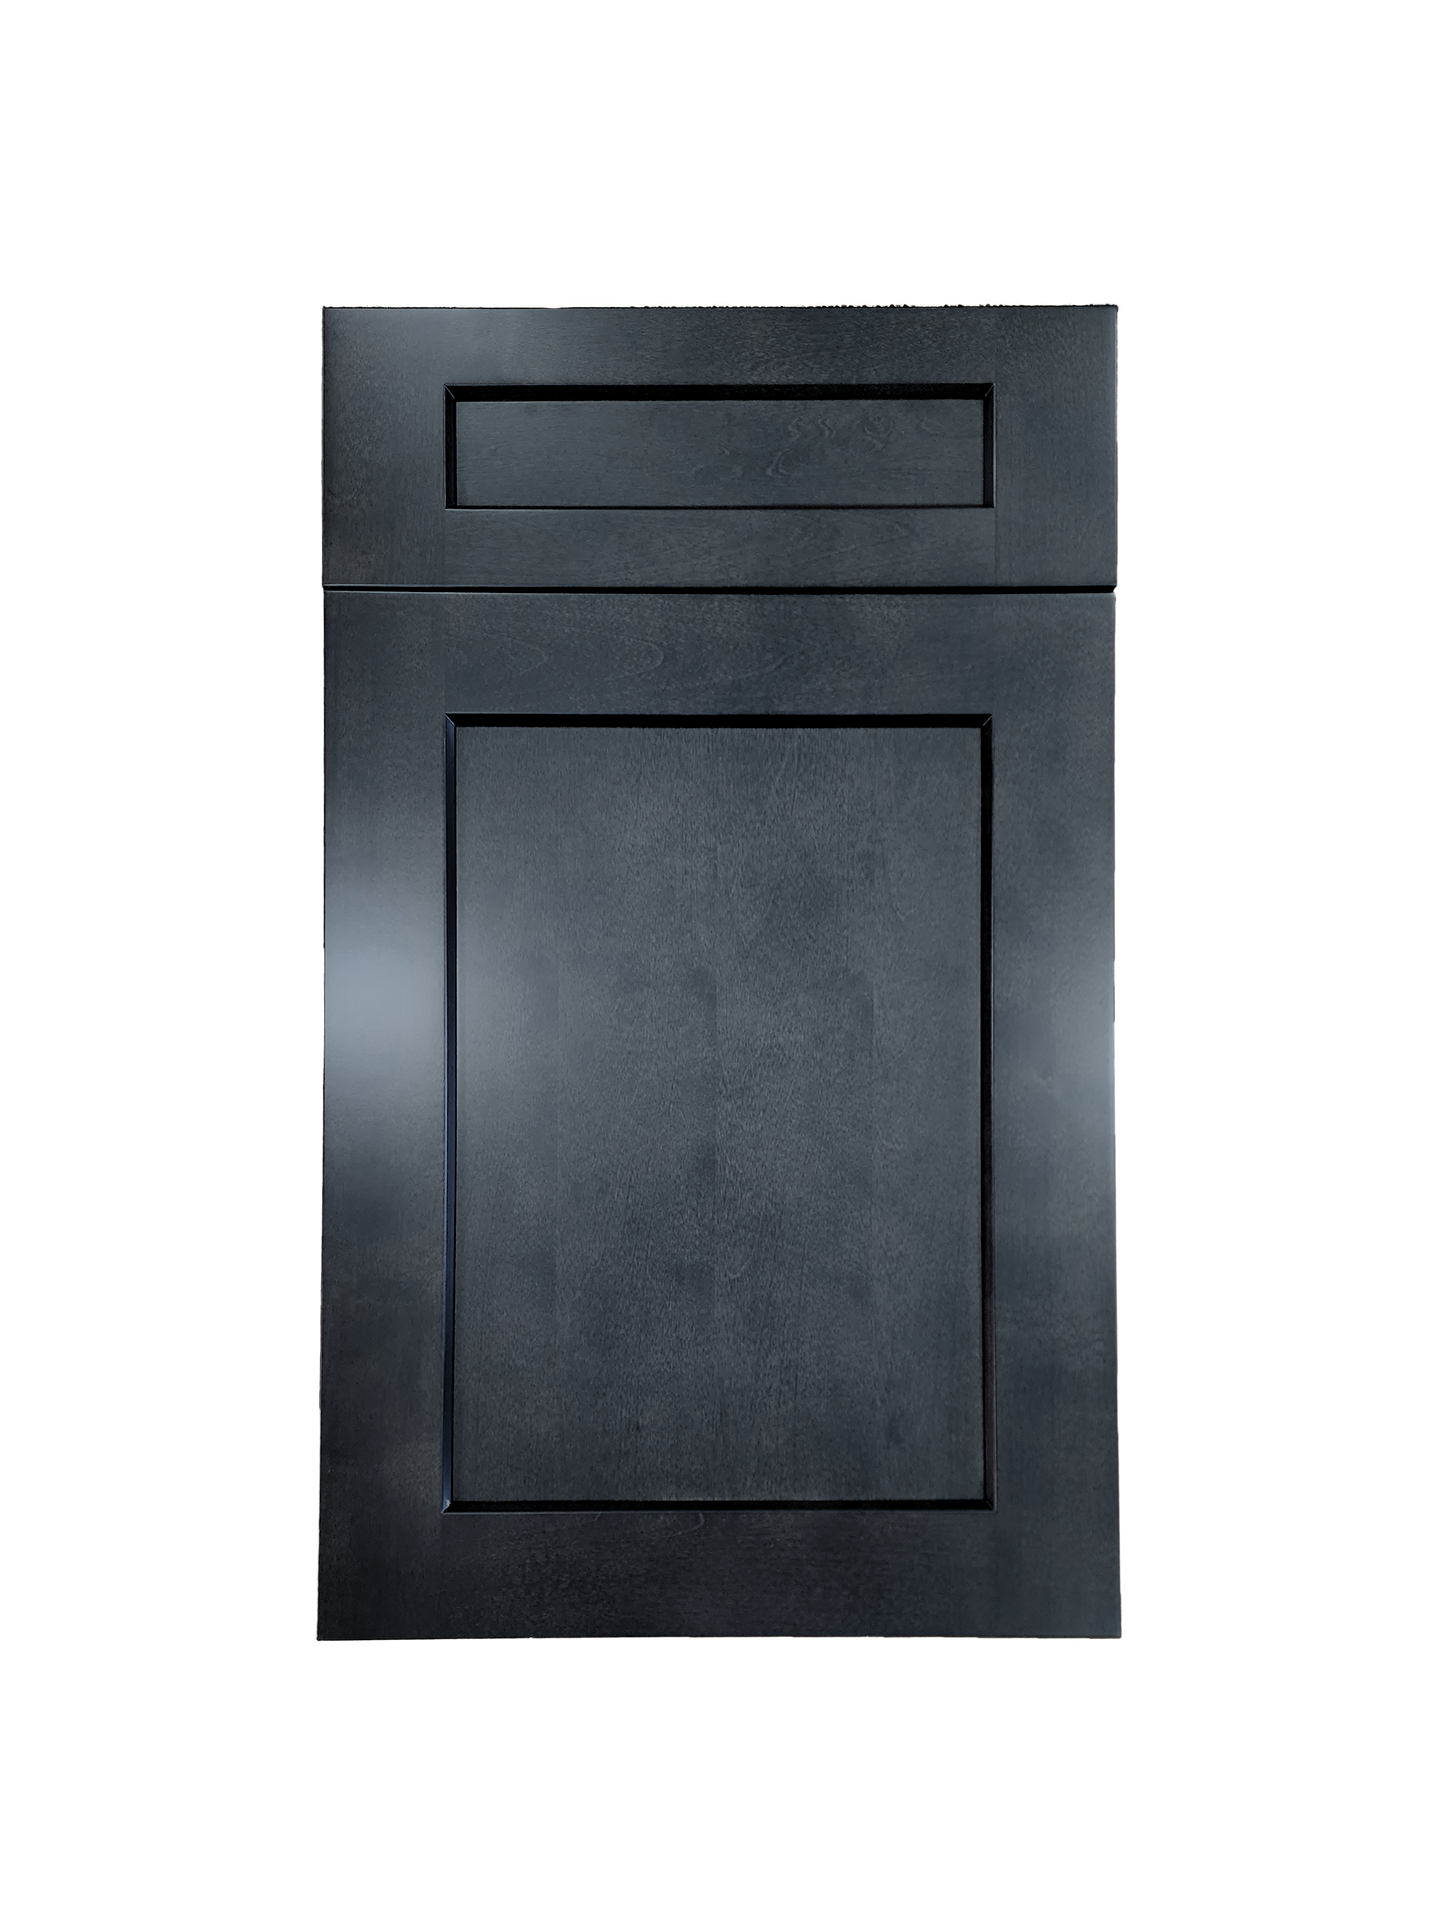 Stormy Grey Base Cabinet 33 inches wide 24 inches deep 34.5 inches tall with Stormy Grey box and Stormy Grey doors